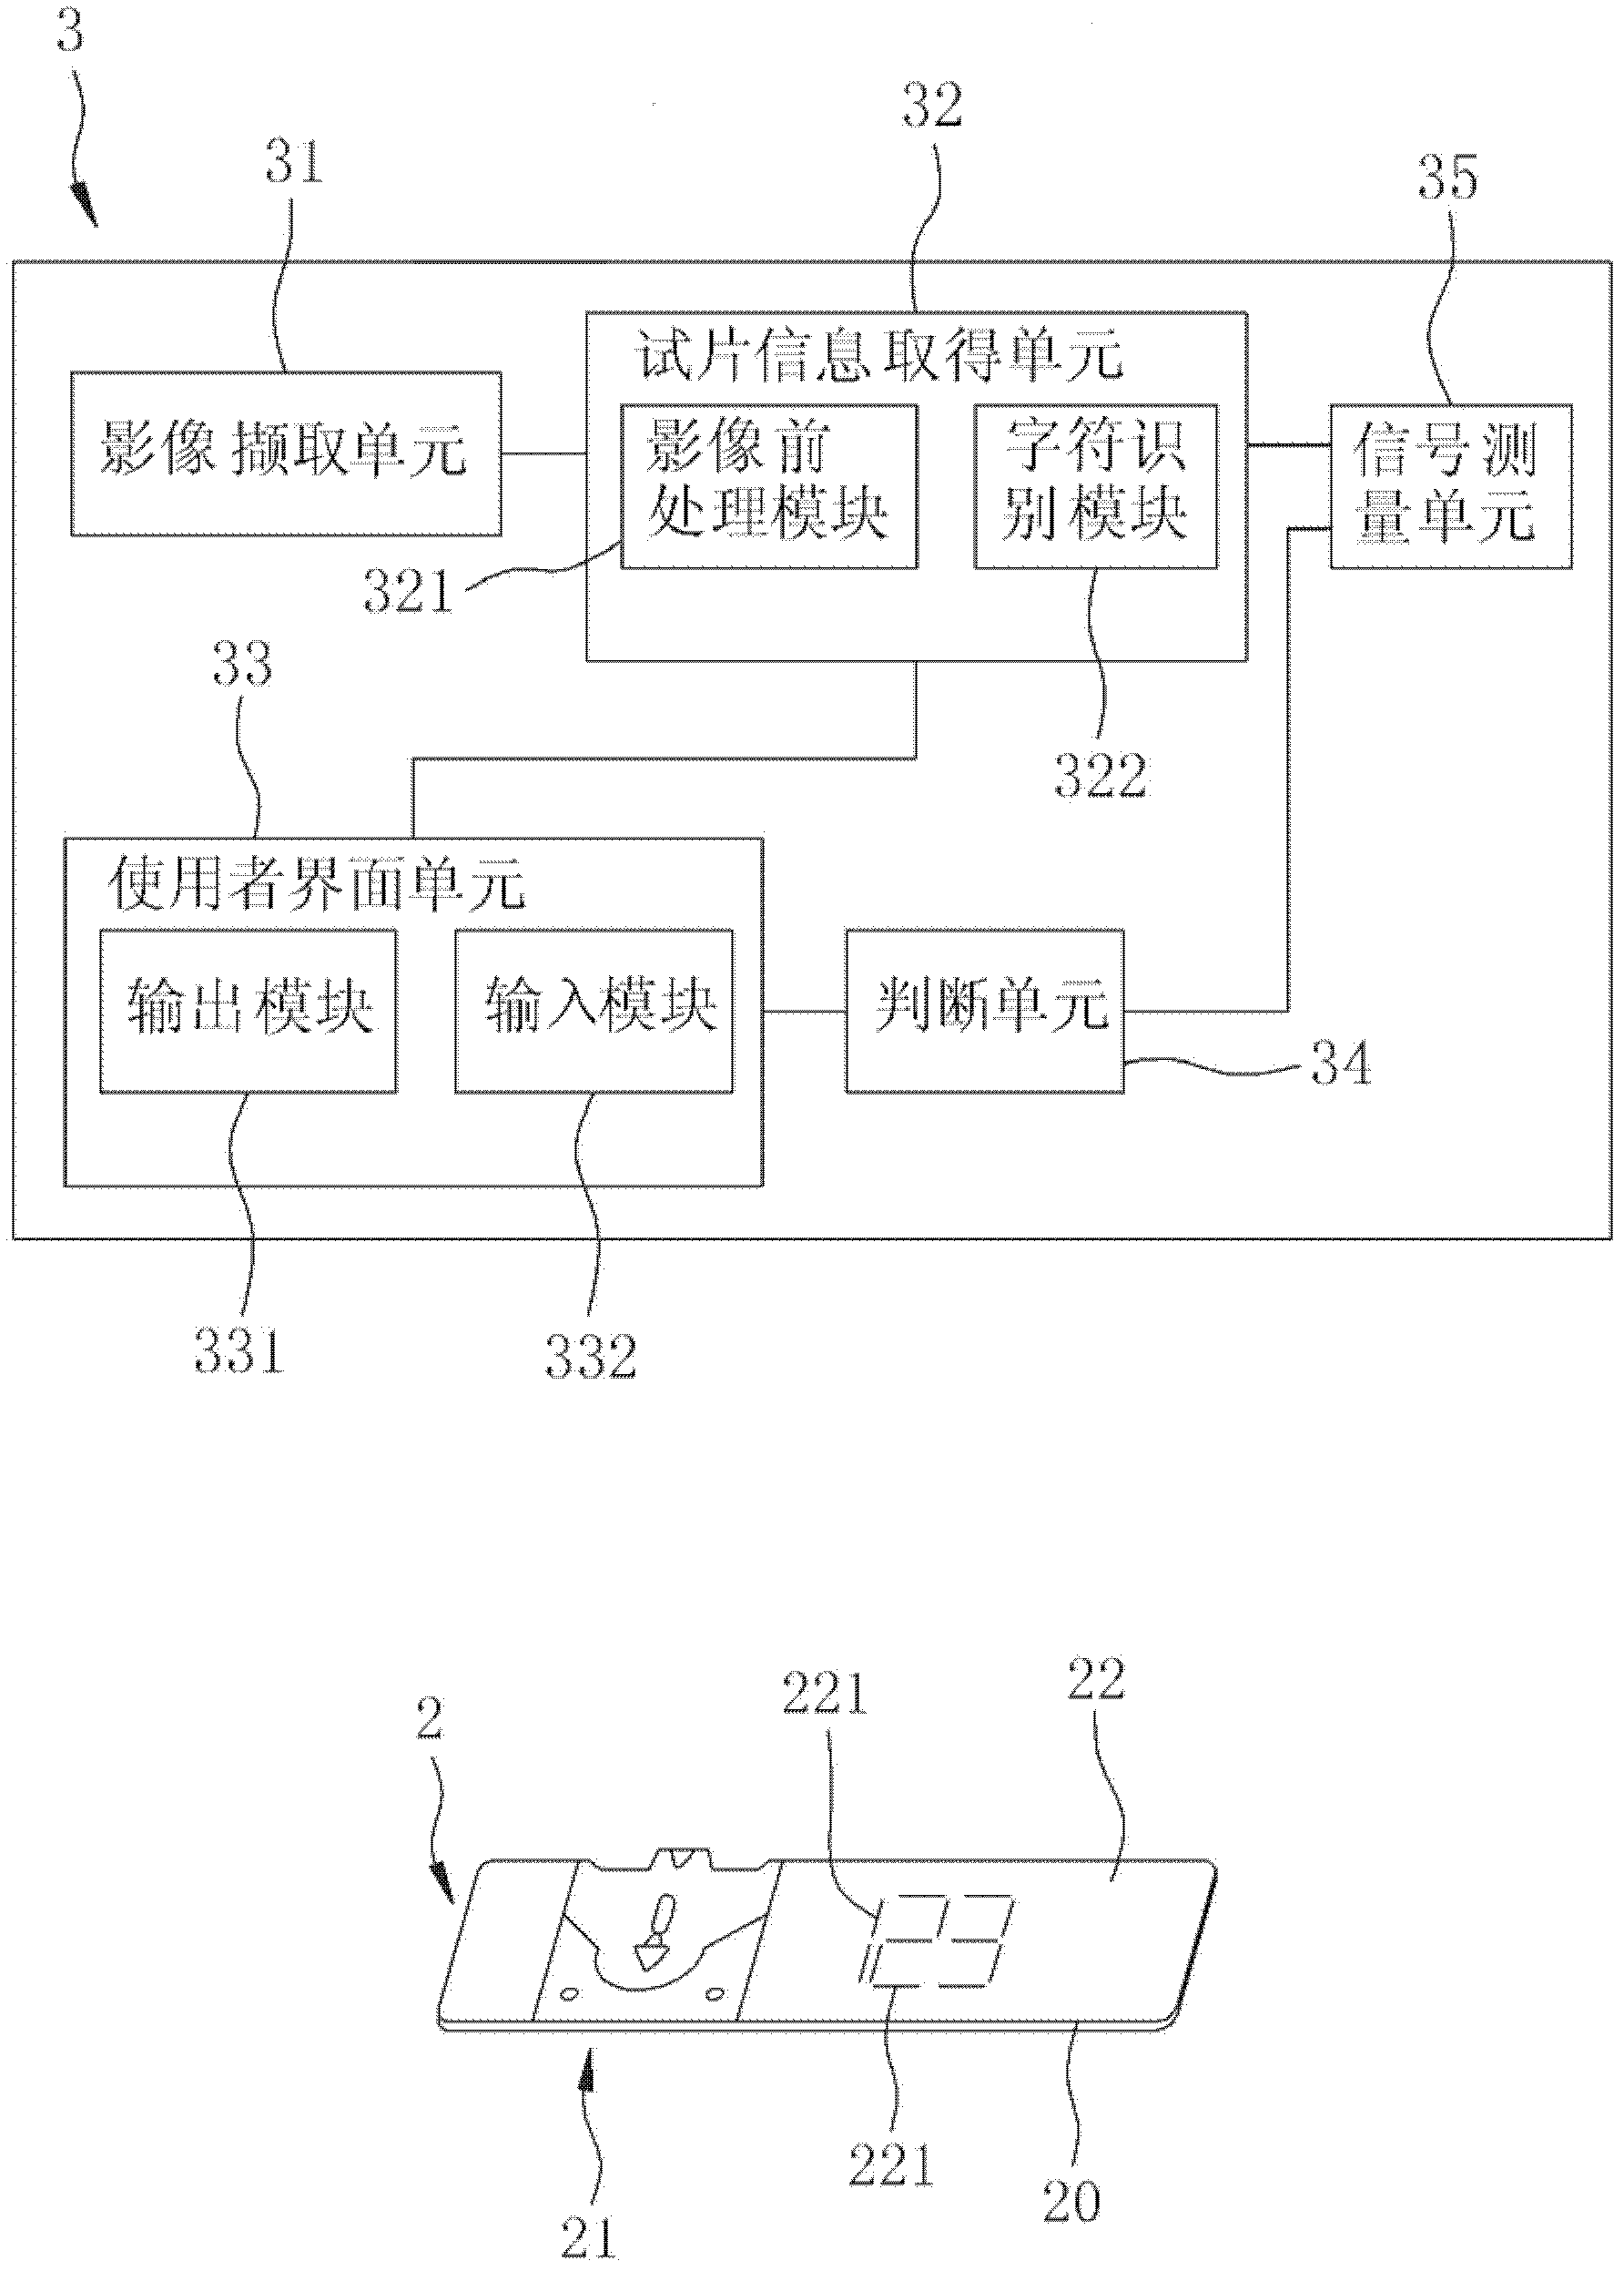 Biosensor measuring system with bidirectionally checkable test piece information and detection test piece structure